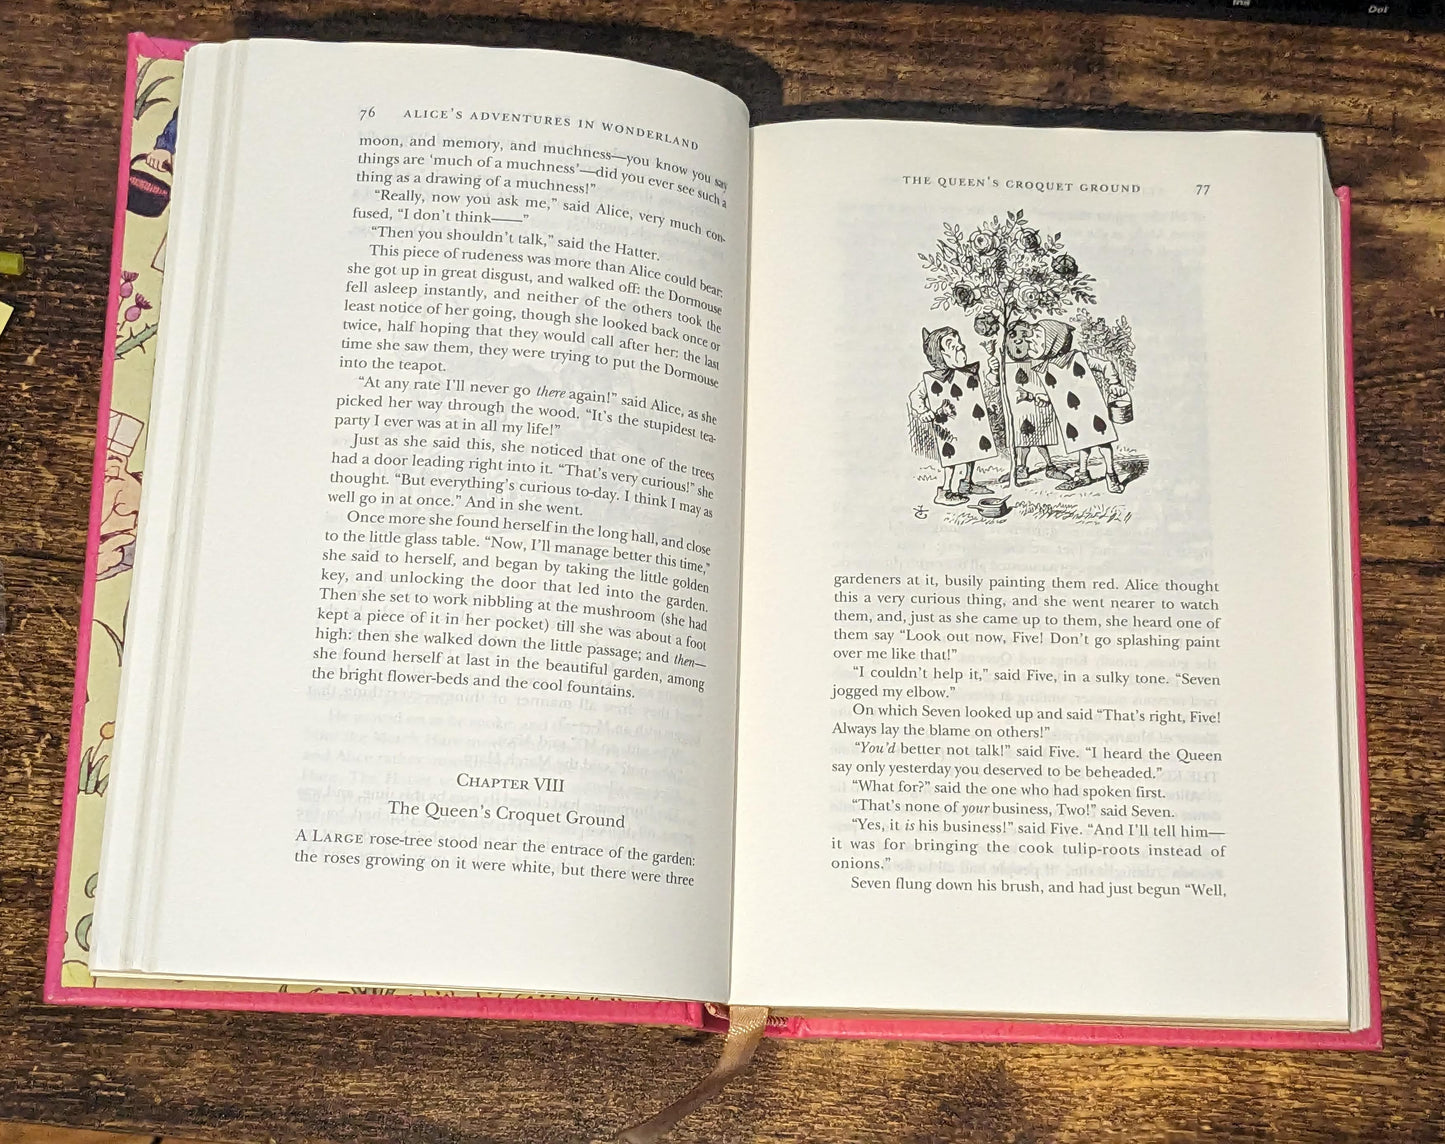 Alice's Adventures in Wonderland & Other Stories (Special Edition Hardcover) by Lewis Carroll